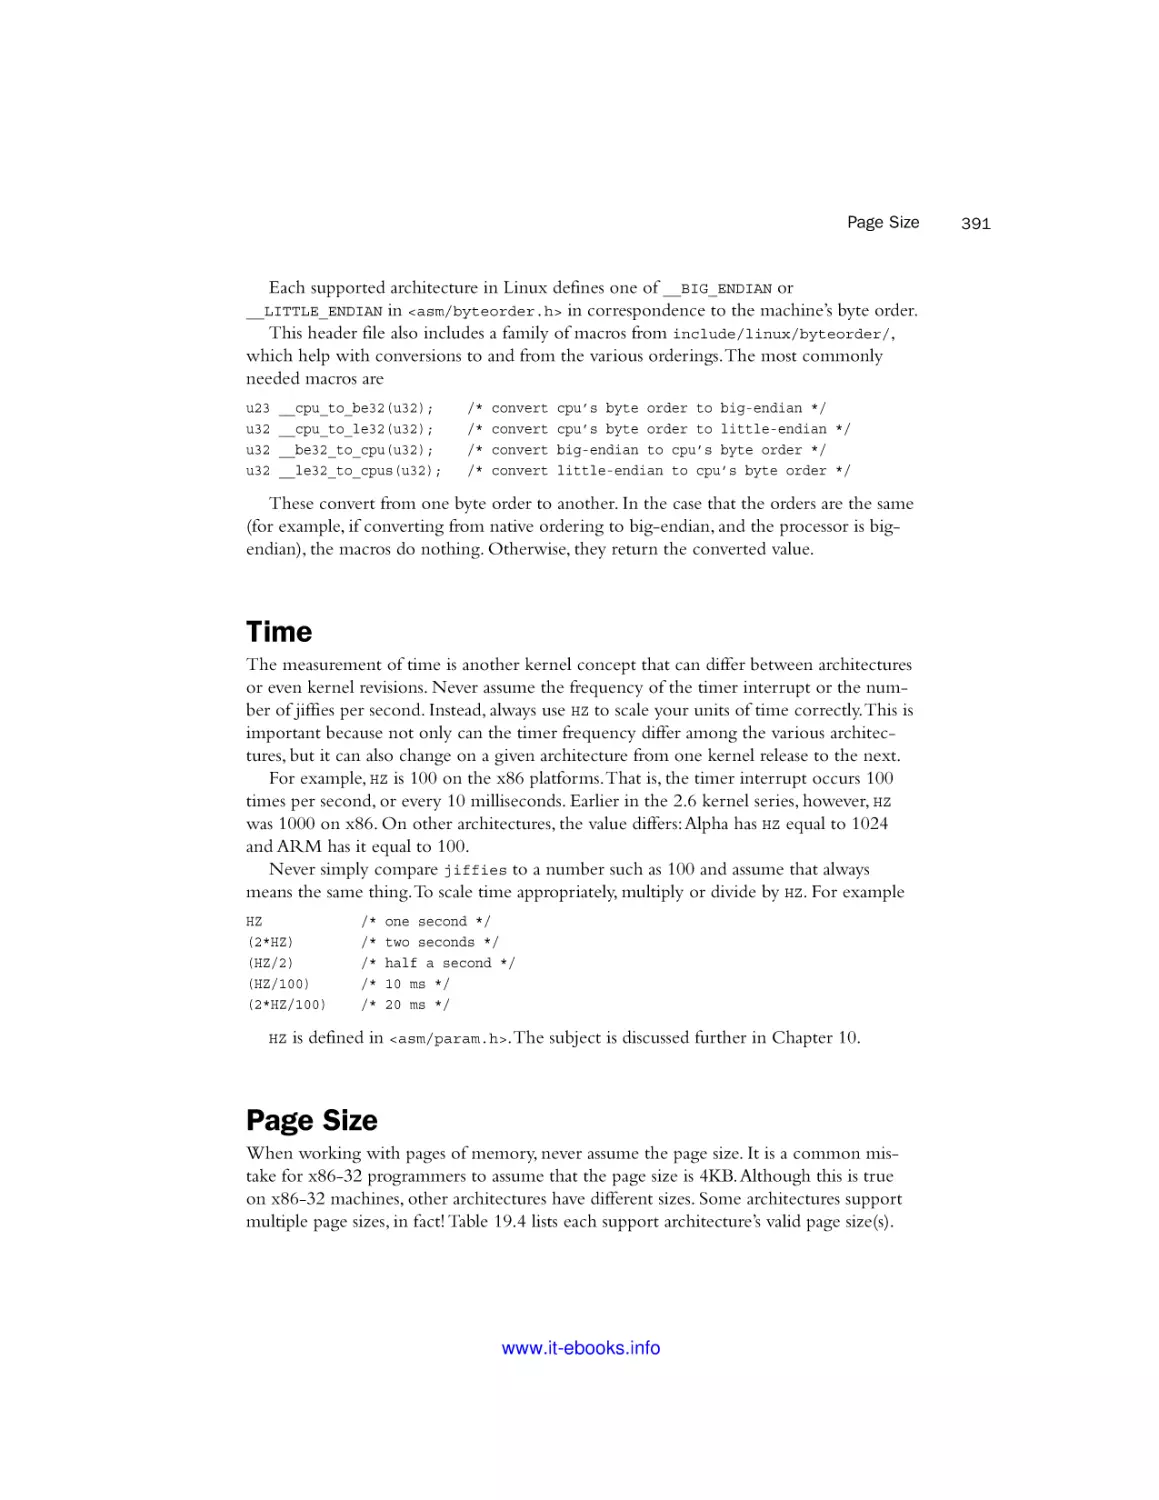 Time
Page Size